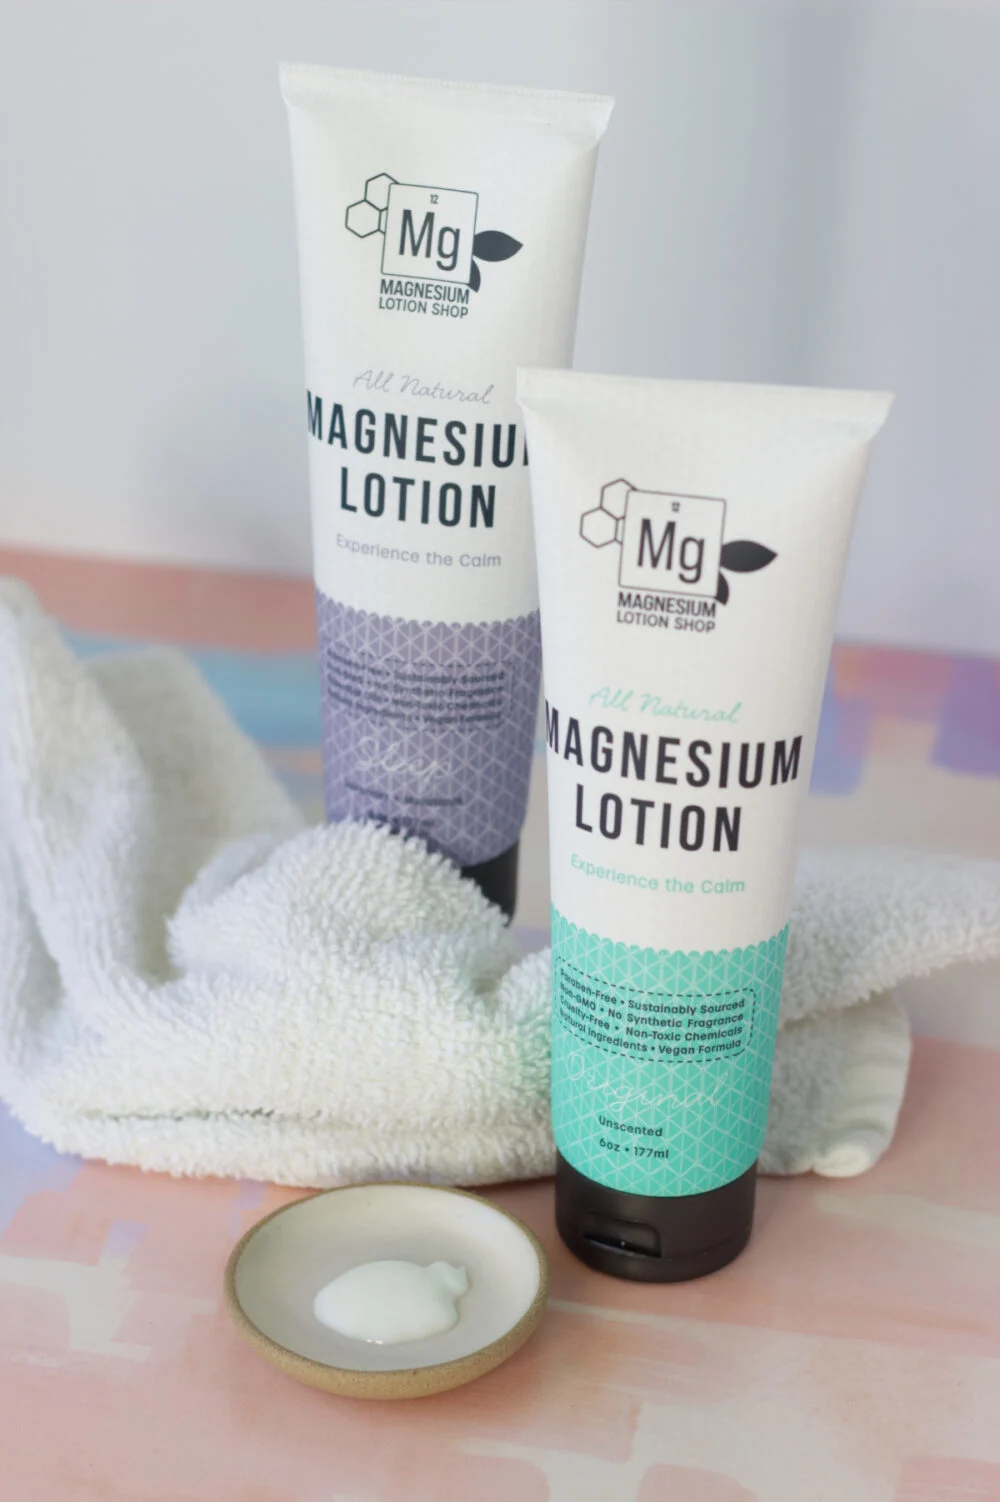 Two tubes of magnesium lotion next to a rag and a dish of the lotion.